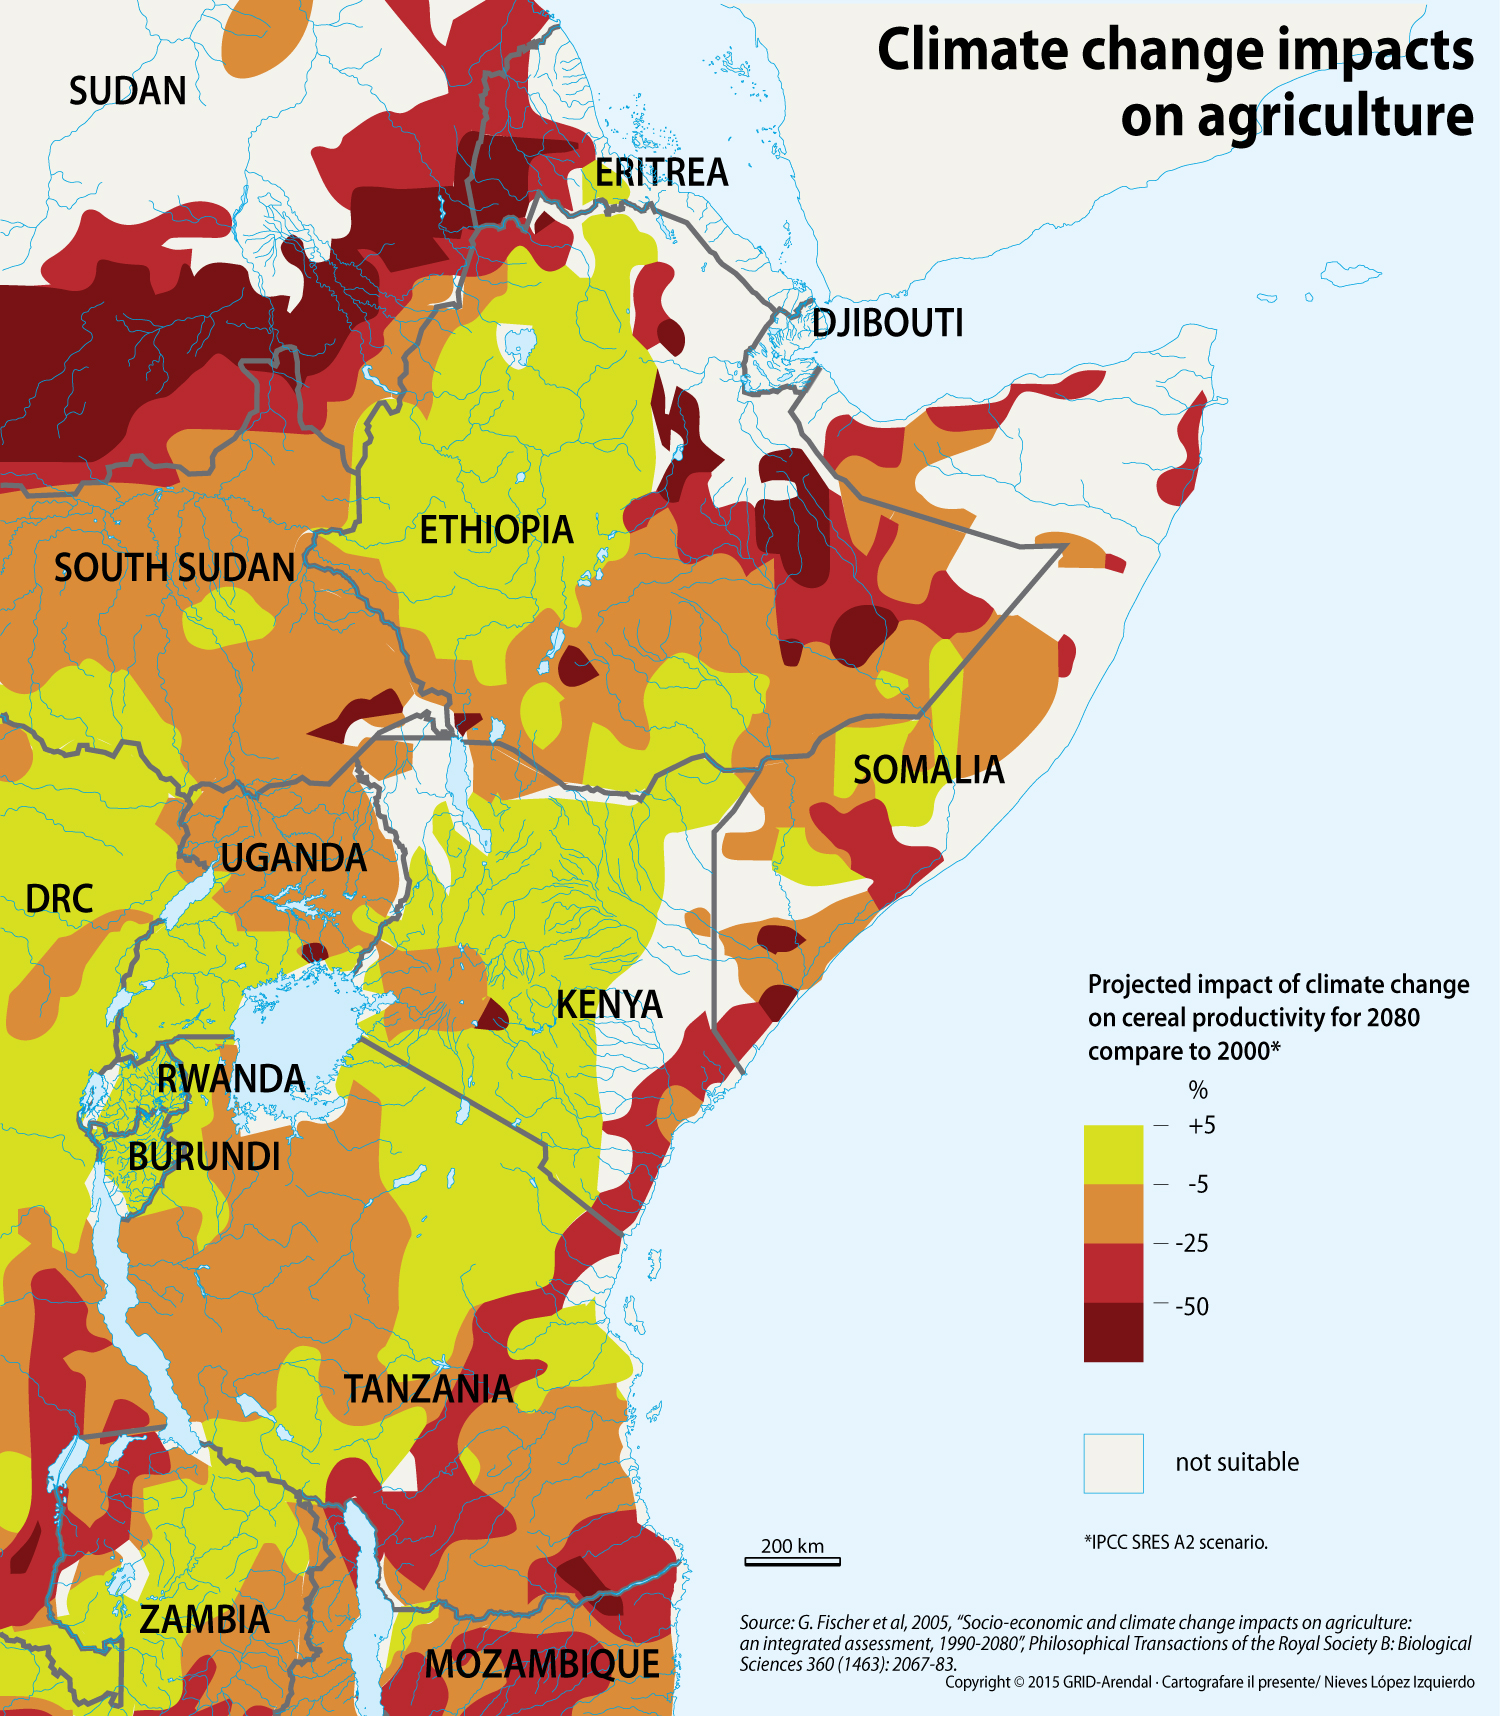 effects of climate change on agriculture in africa pdf